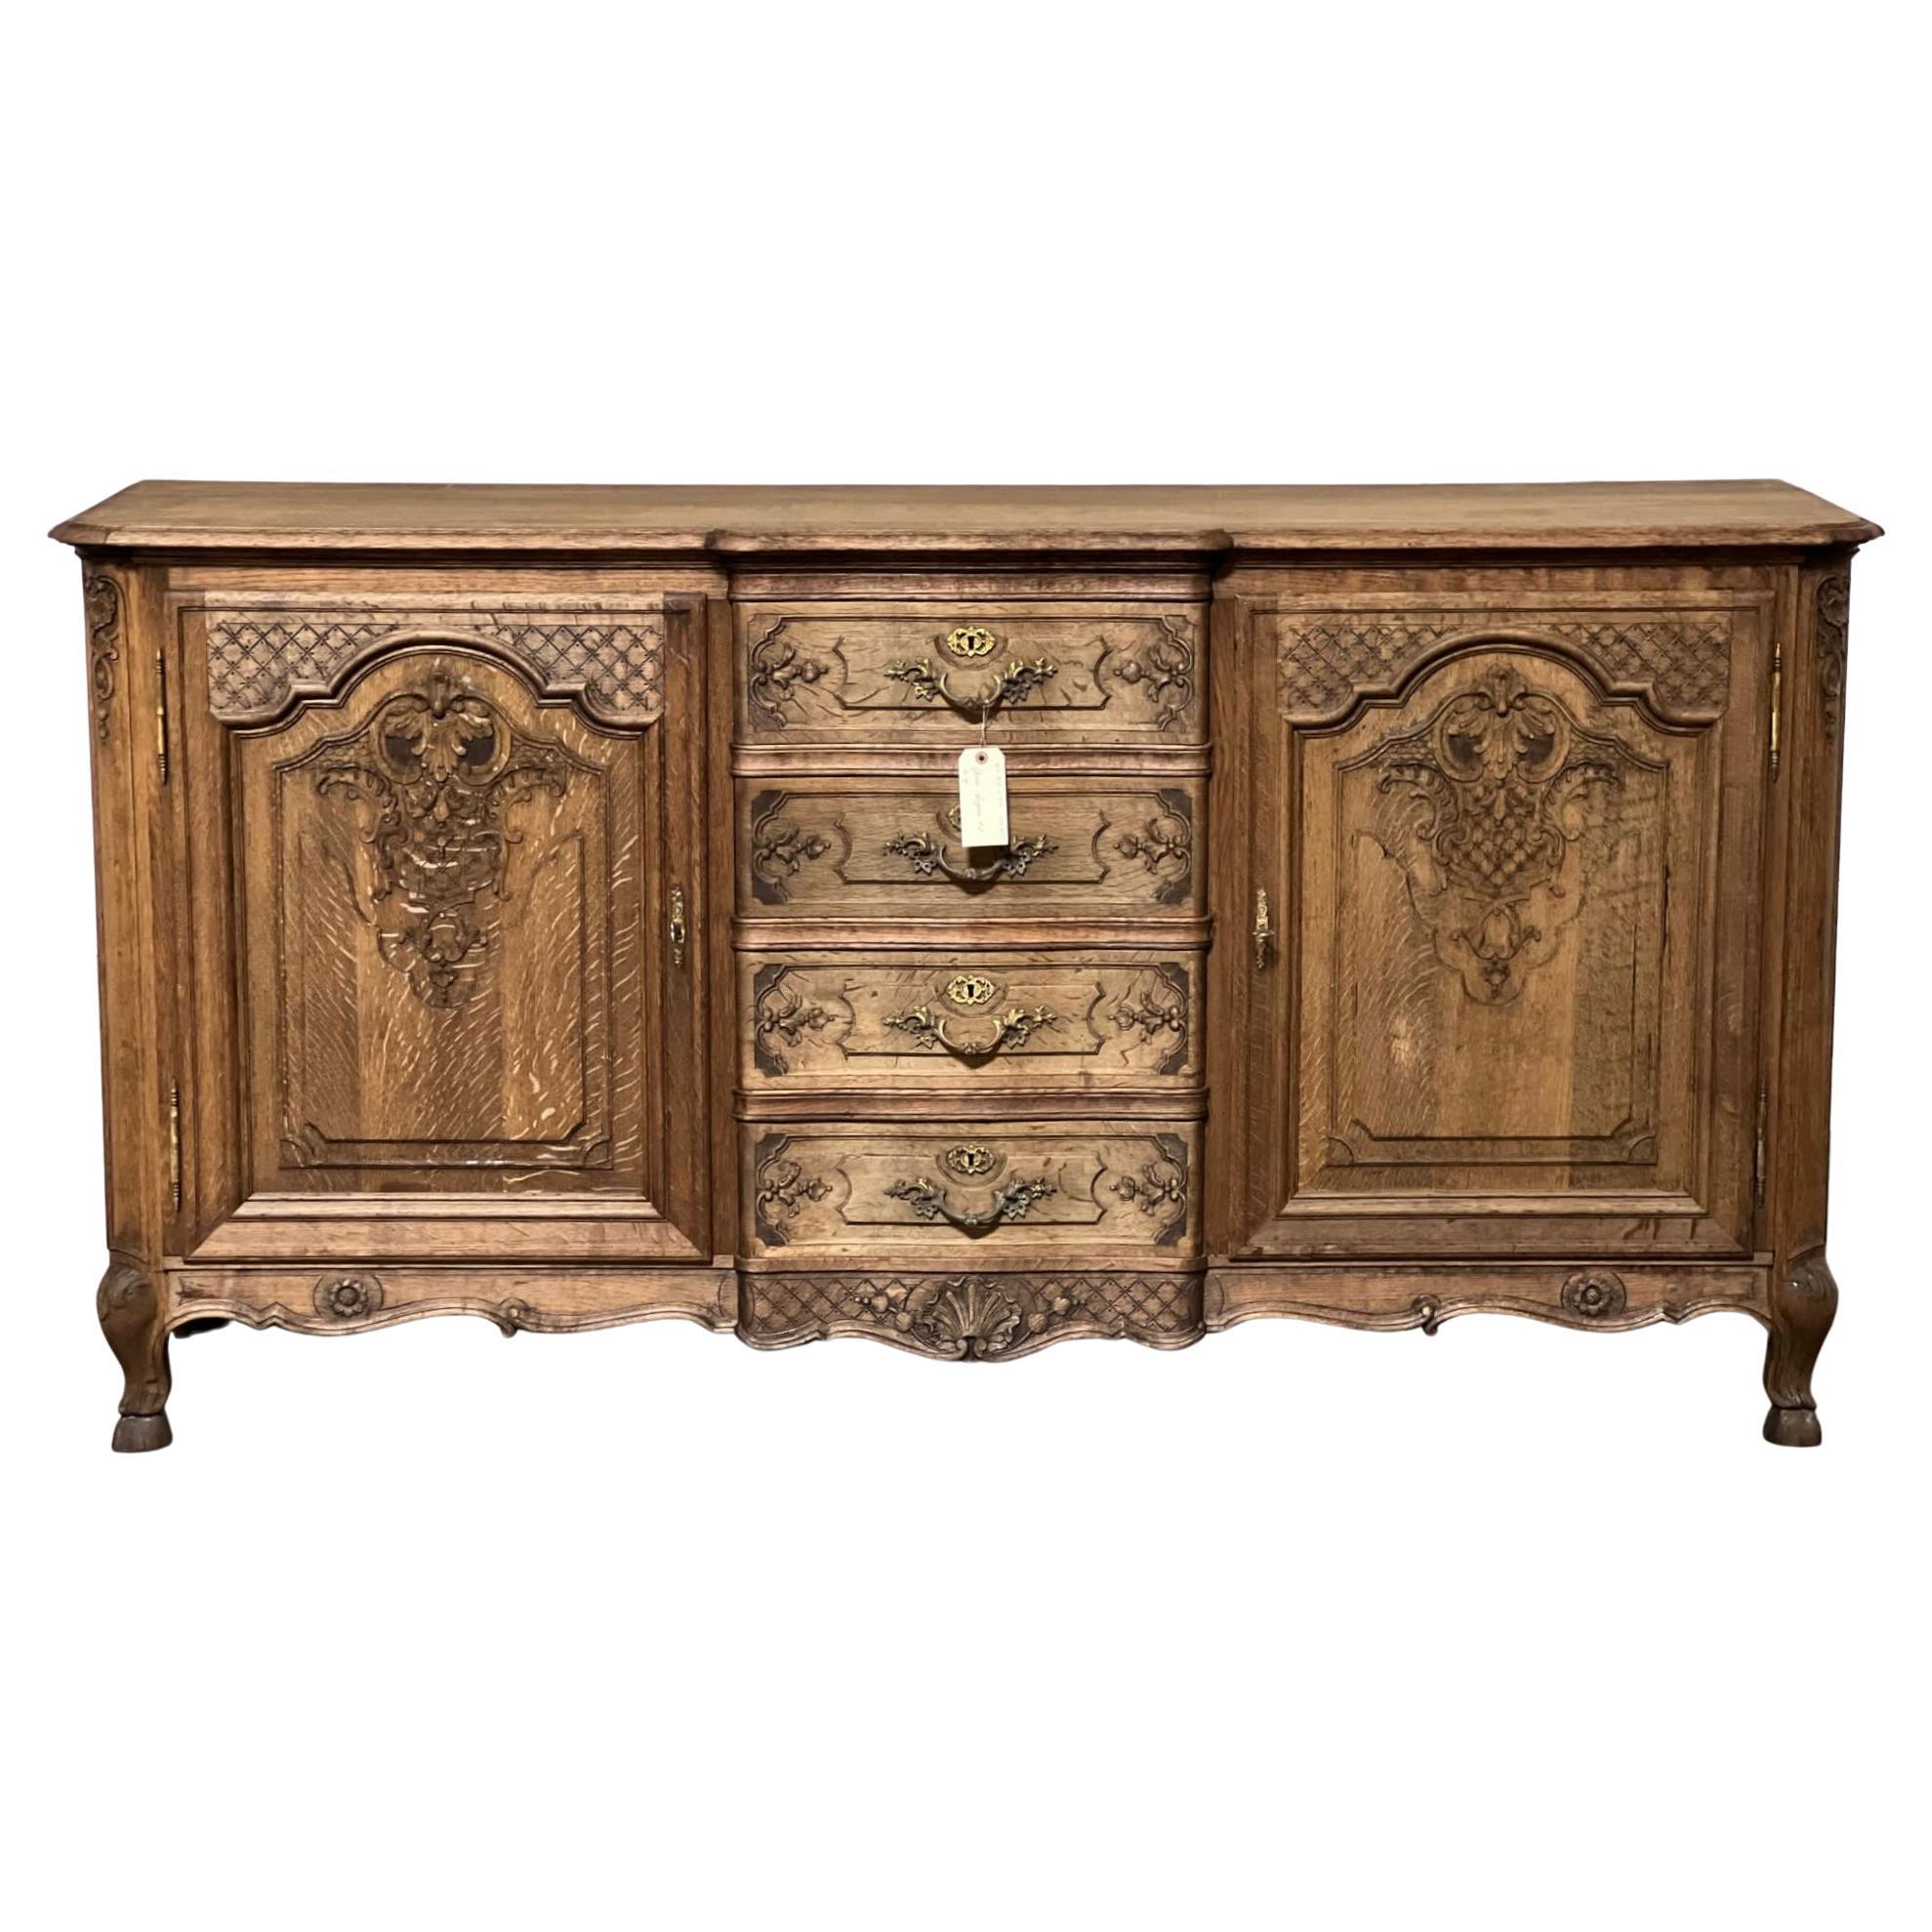 Lovely French Bleached Oak Sideboard or Enfilade